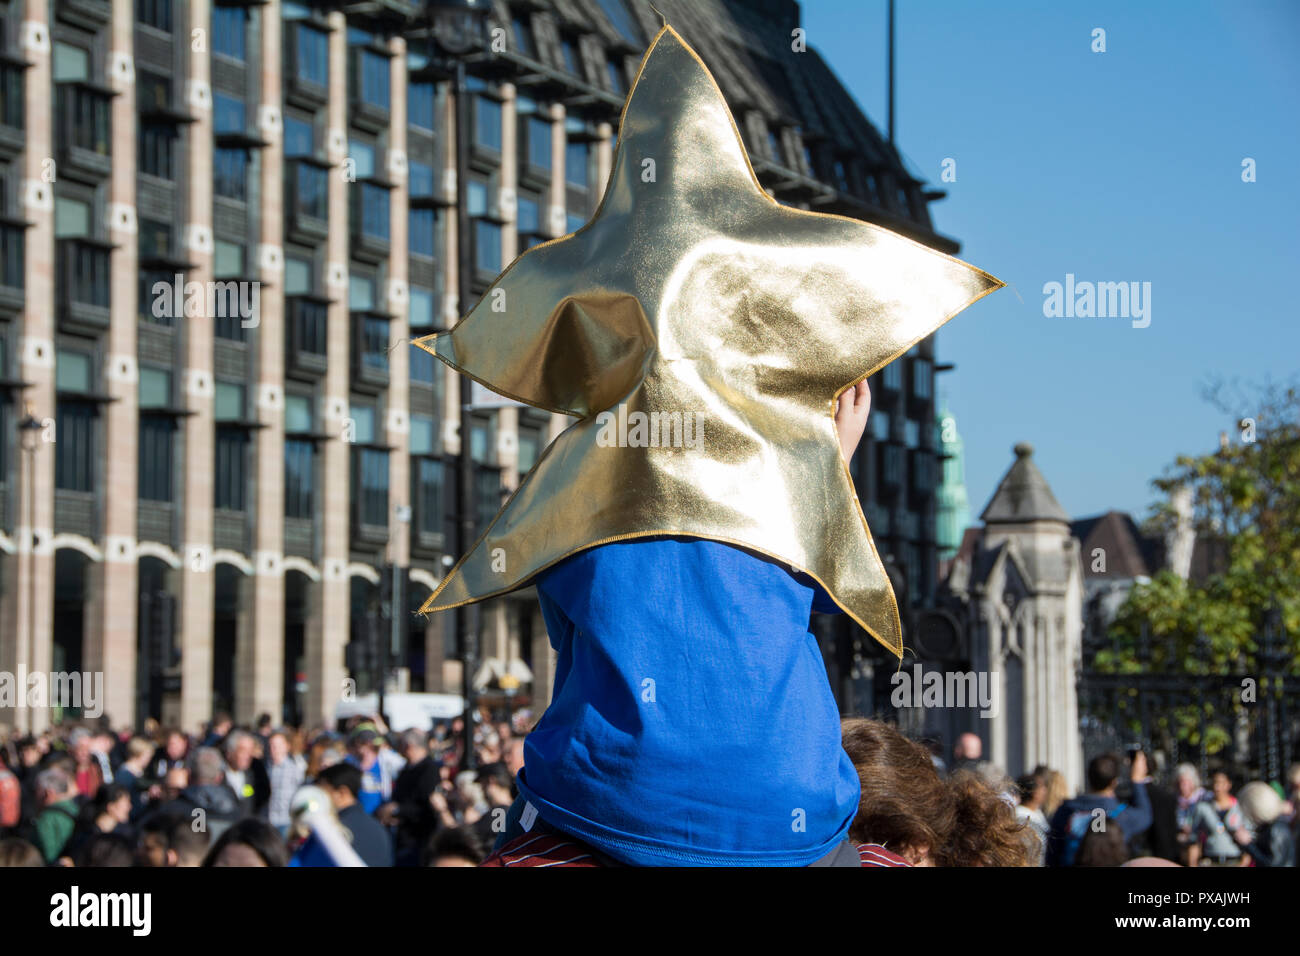 London, England, UK. 20 October, 2018.  A star is born! More than 700,000 people took part in the People's Vote march © Benjamin John/ Alamy Stock Photo